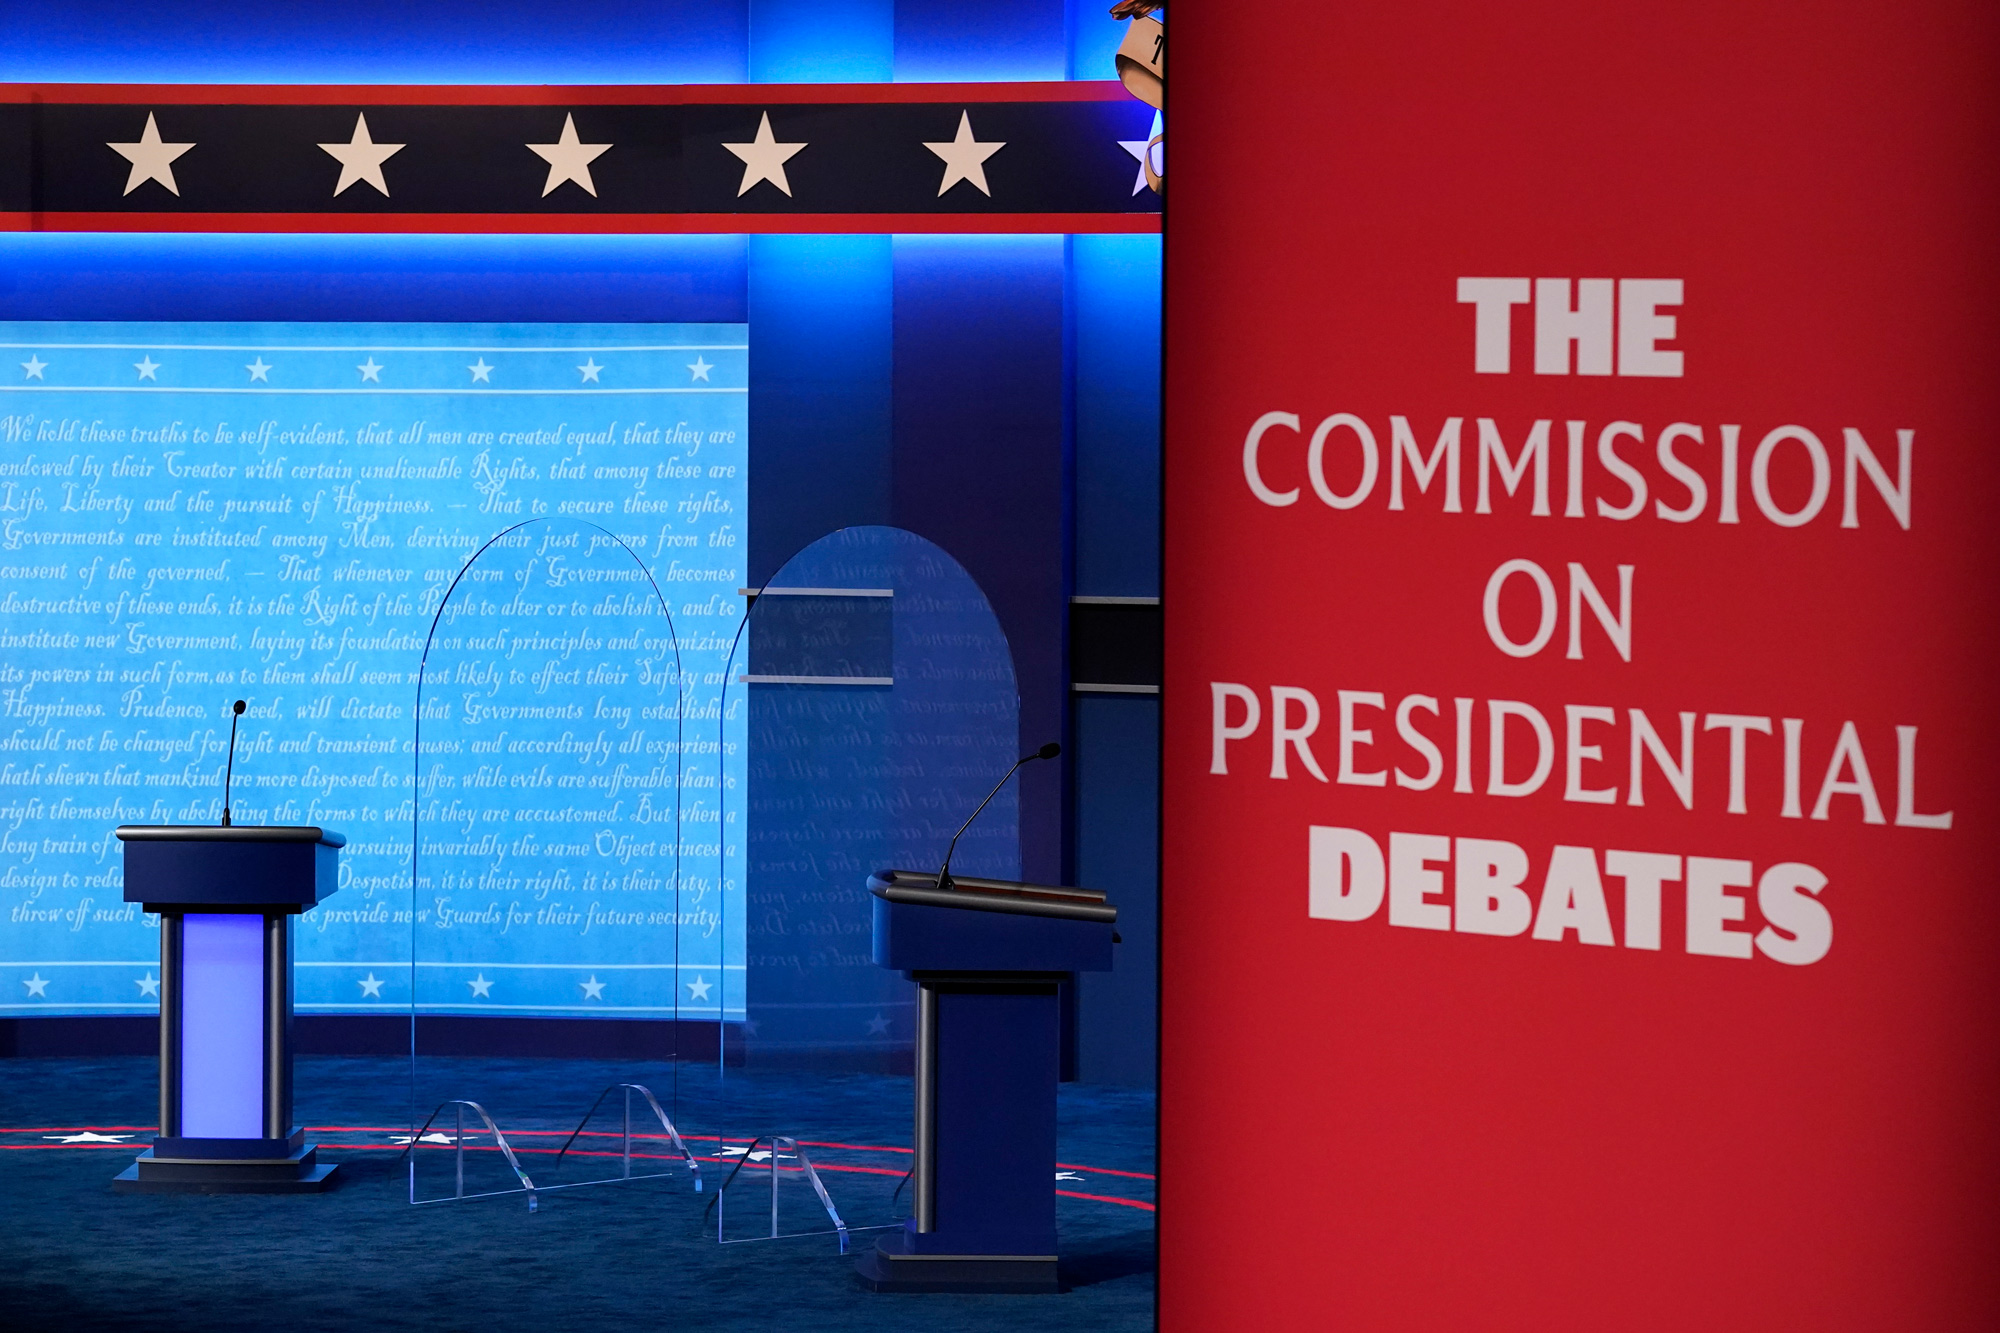 Clear protective panels stand onstage between lecterns as preparations take place for the second Presidential debate at Belmont University on October 21 in Nashville.